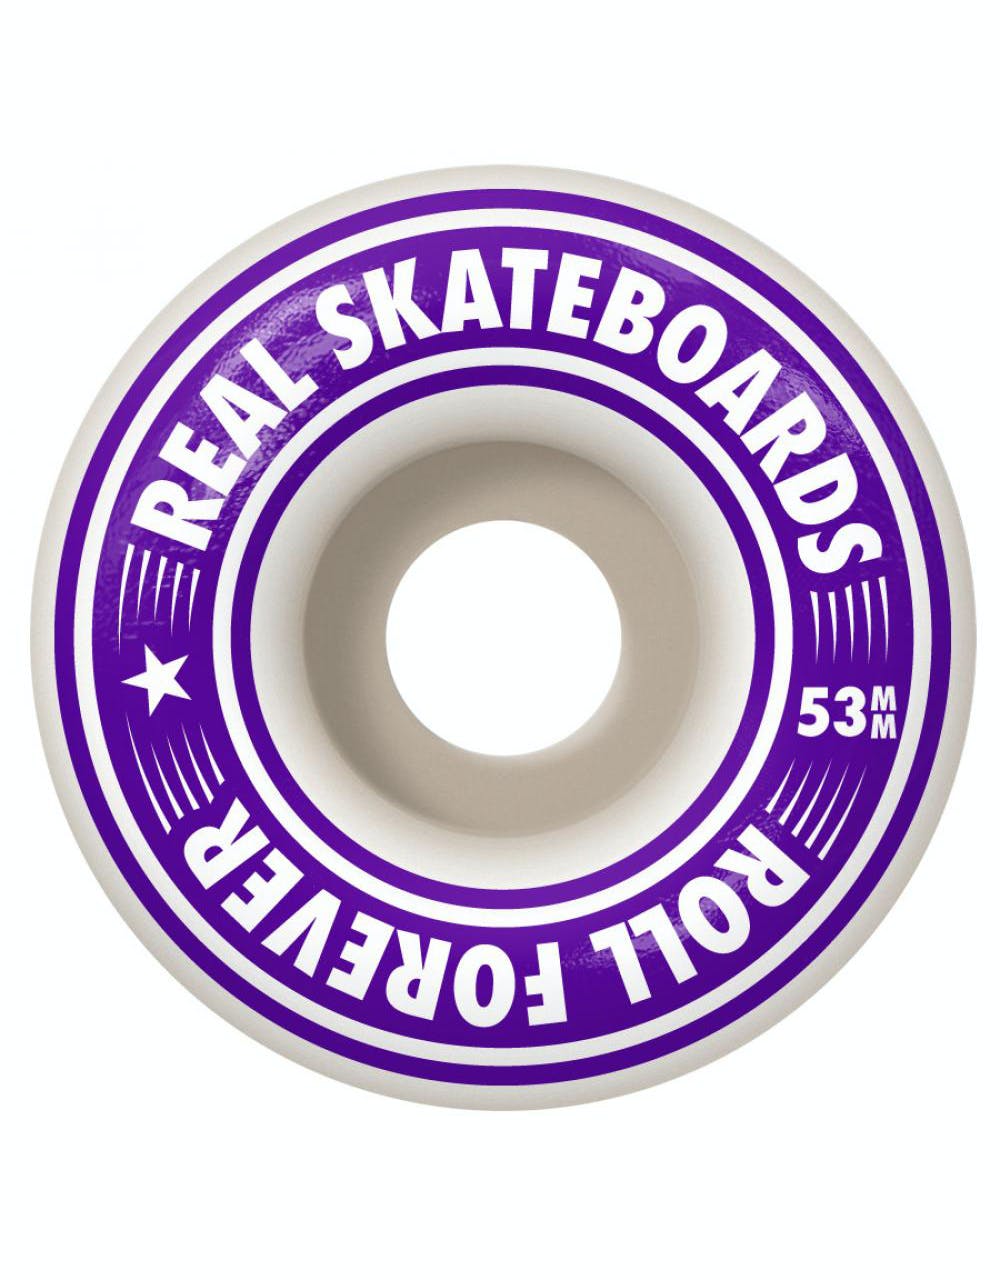 Real Oval Gleams Complete Skateboard - 7.38"